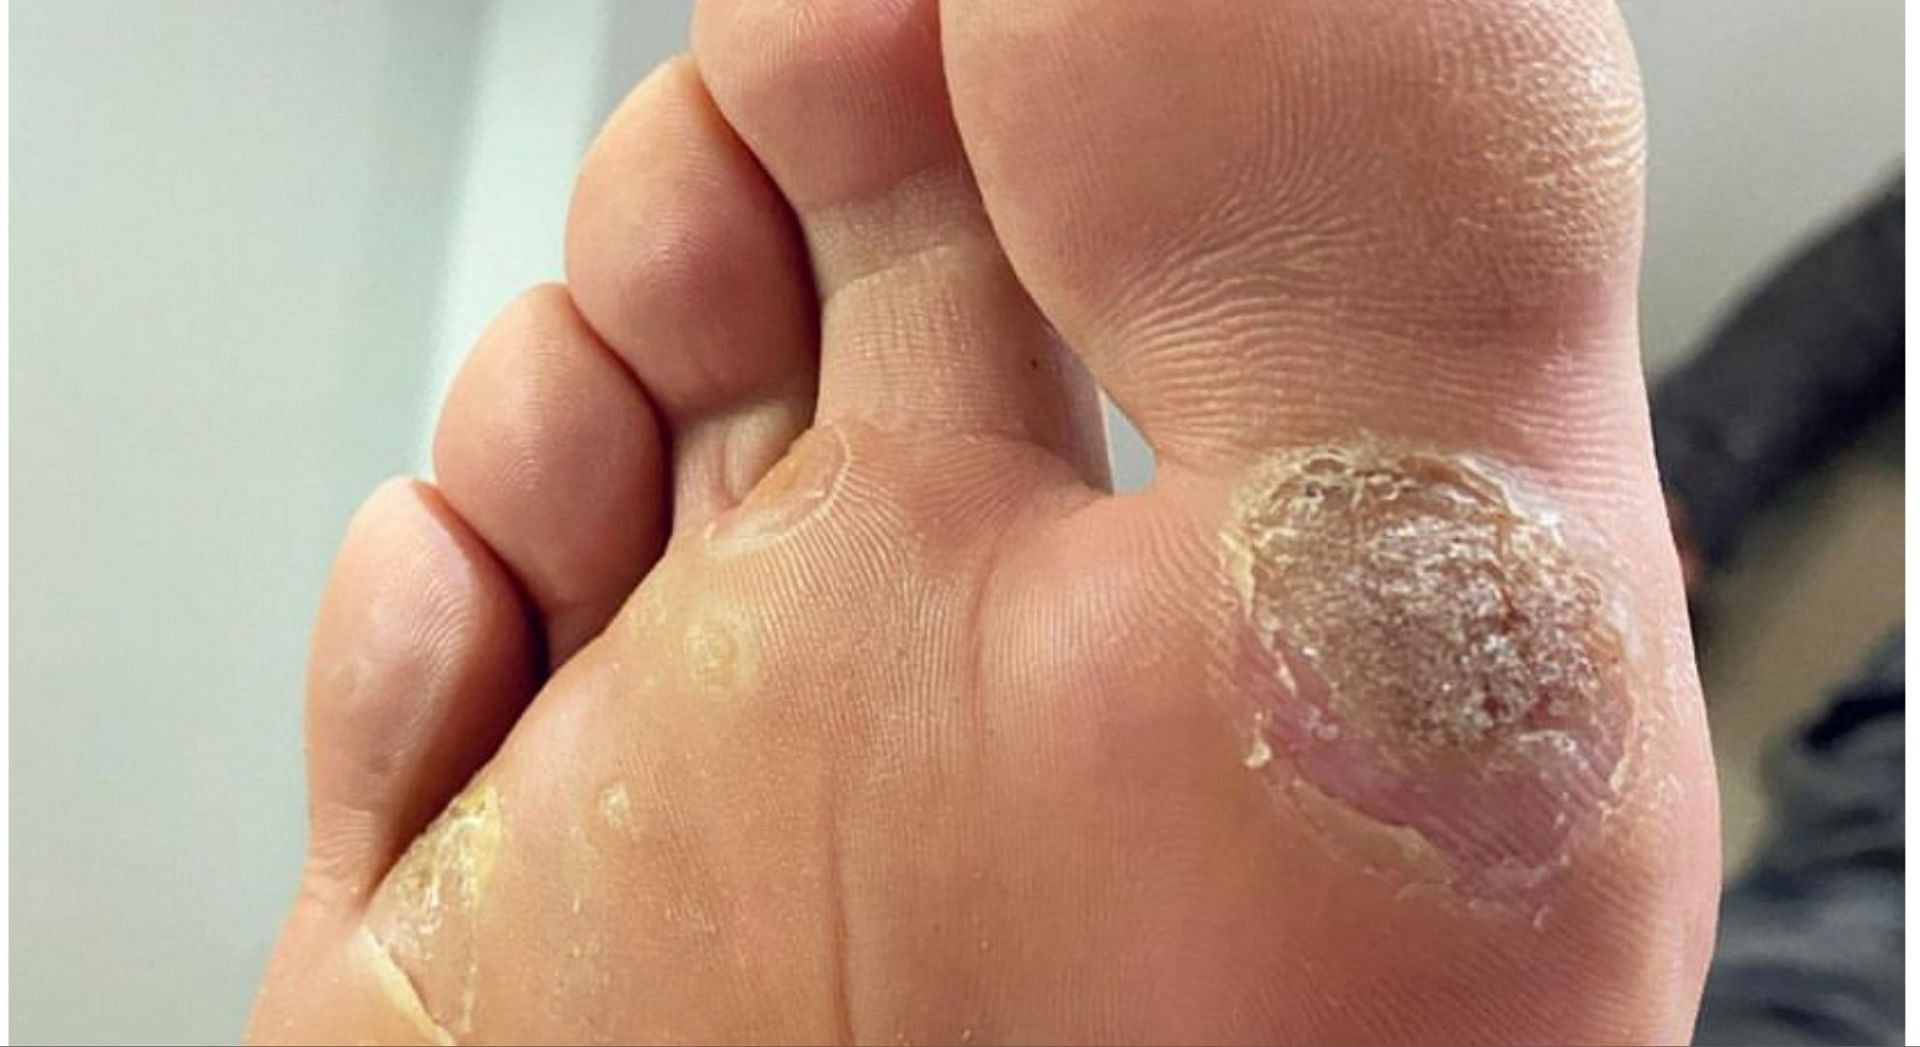 Warts on the feet can be treated by several methods. (Photo via Instagram/drmichaelcollins)